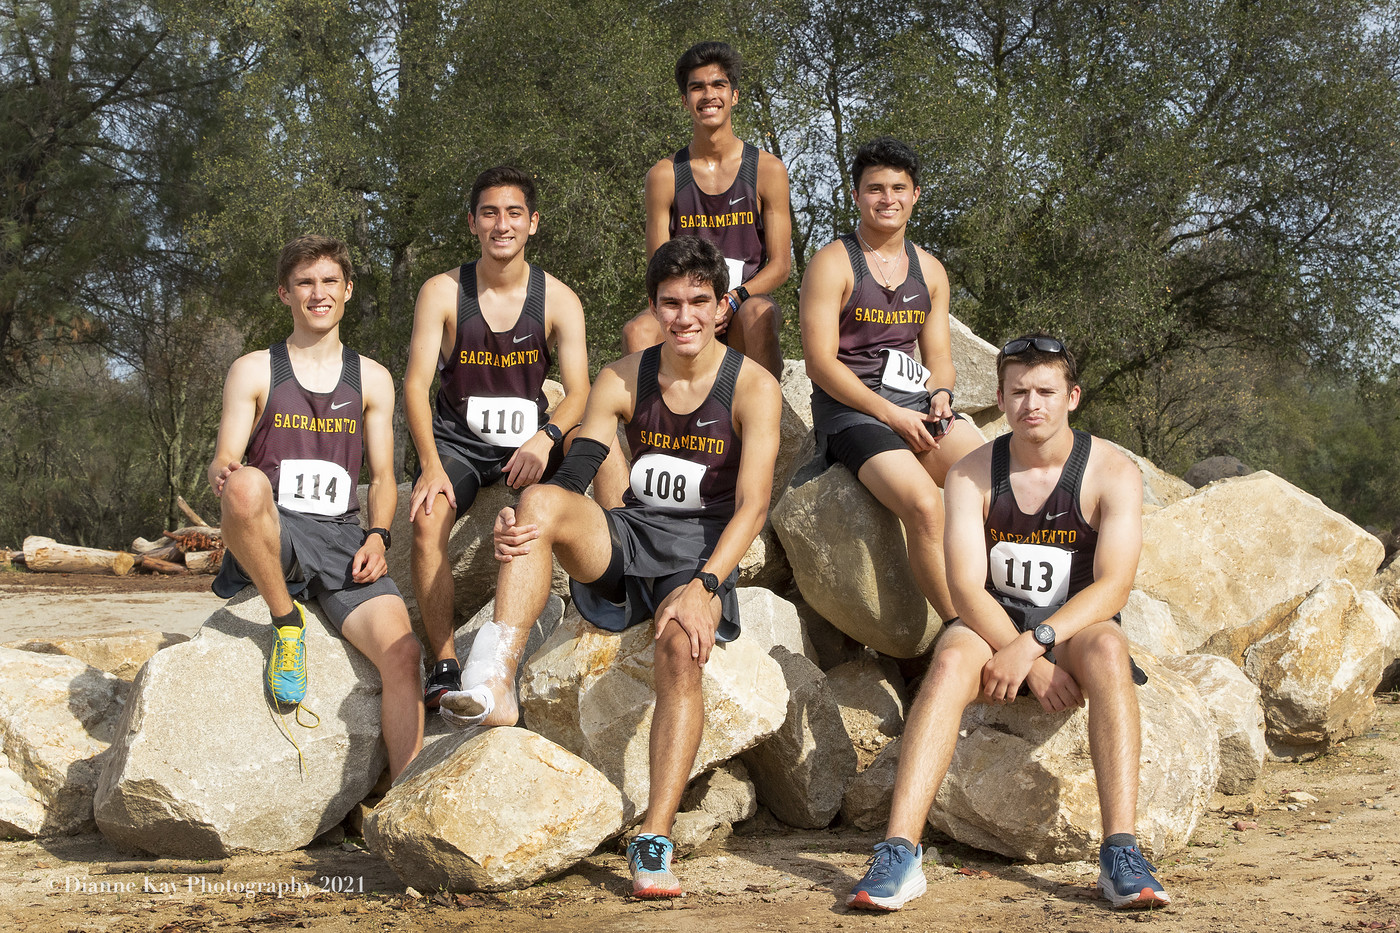 City finishes 15th overall at the Nor-Cal Championships; Walker qualifies for the individual State Championship later this month